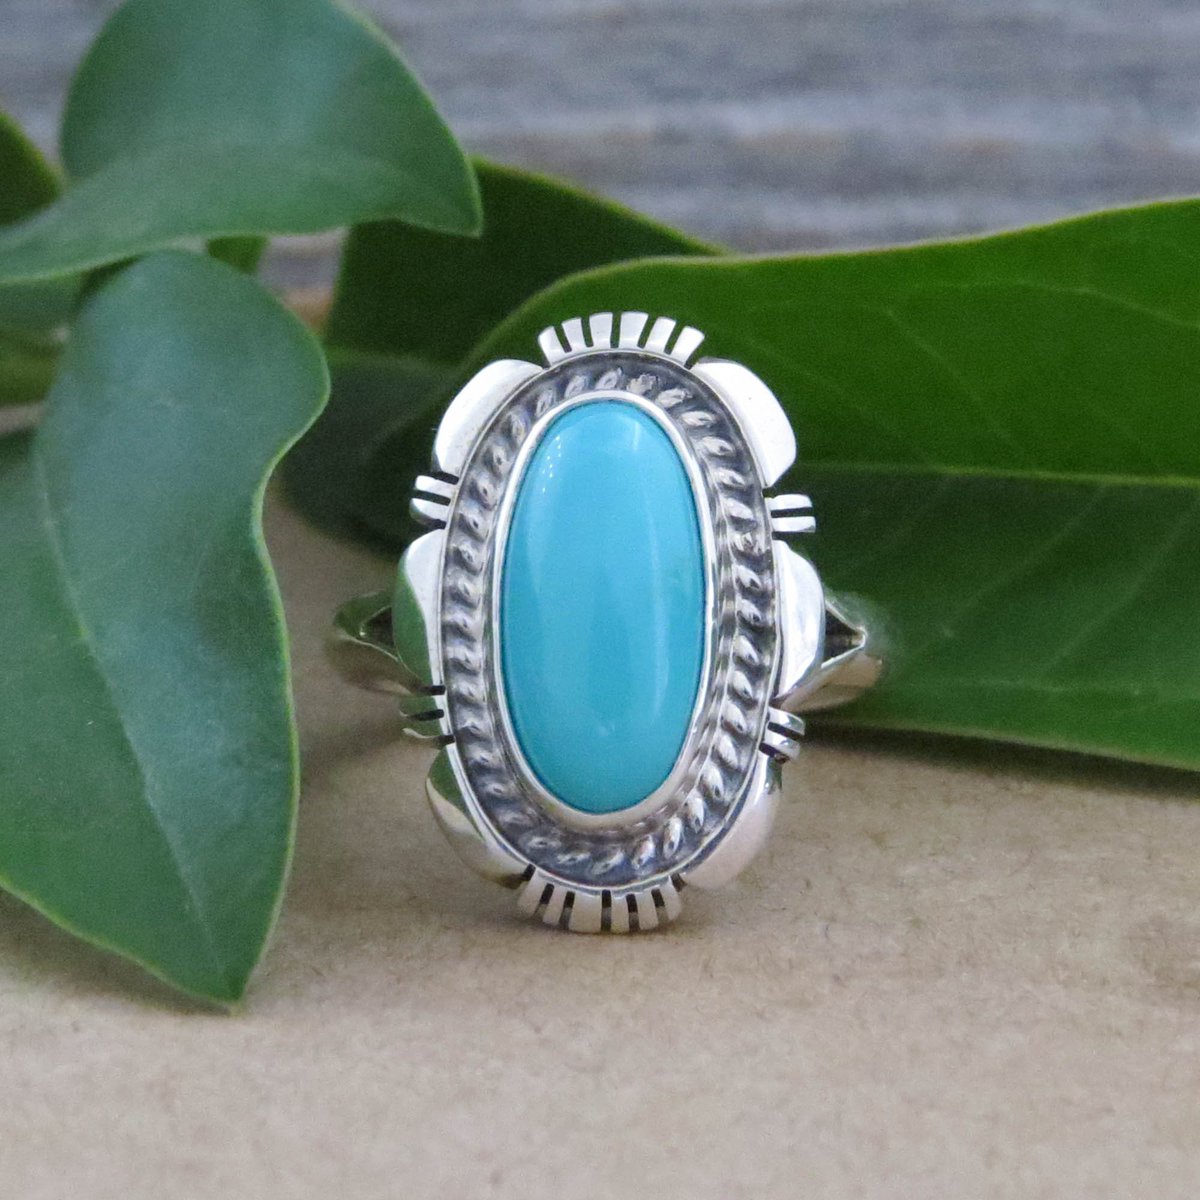 Put a Halo around your Finger! ❤️️SHOP HERE: etsy.me/42Pmasv❤️️
#turquoisering #silverring #turquoisejewelry #southwesternring #westernring #handmadejewelry #navajojewelry #navajomade #nativeamericanjewelry